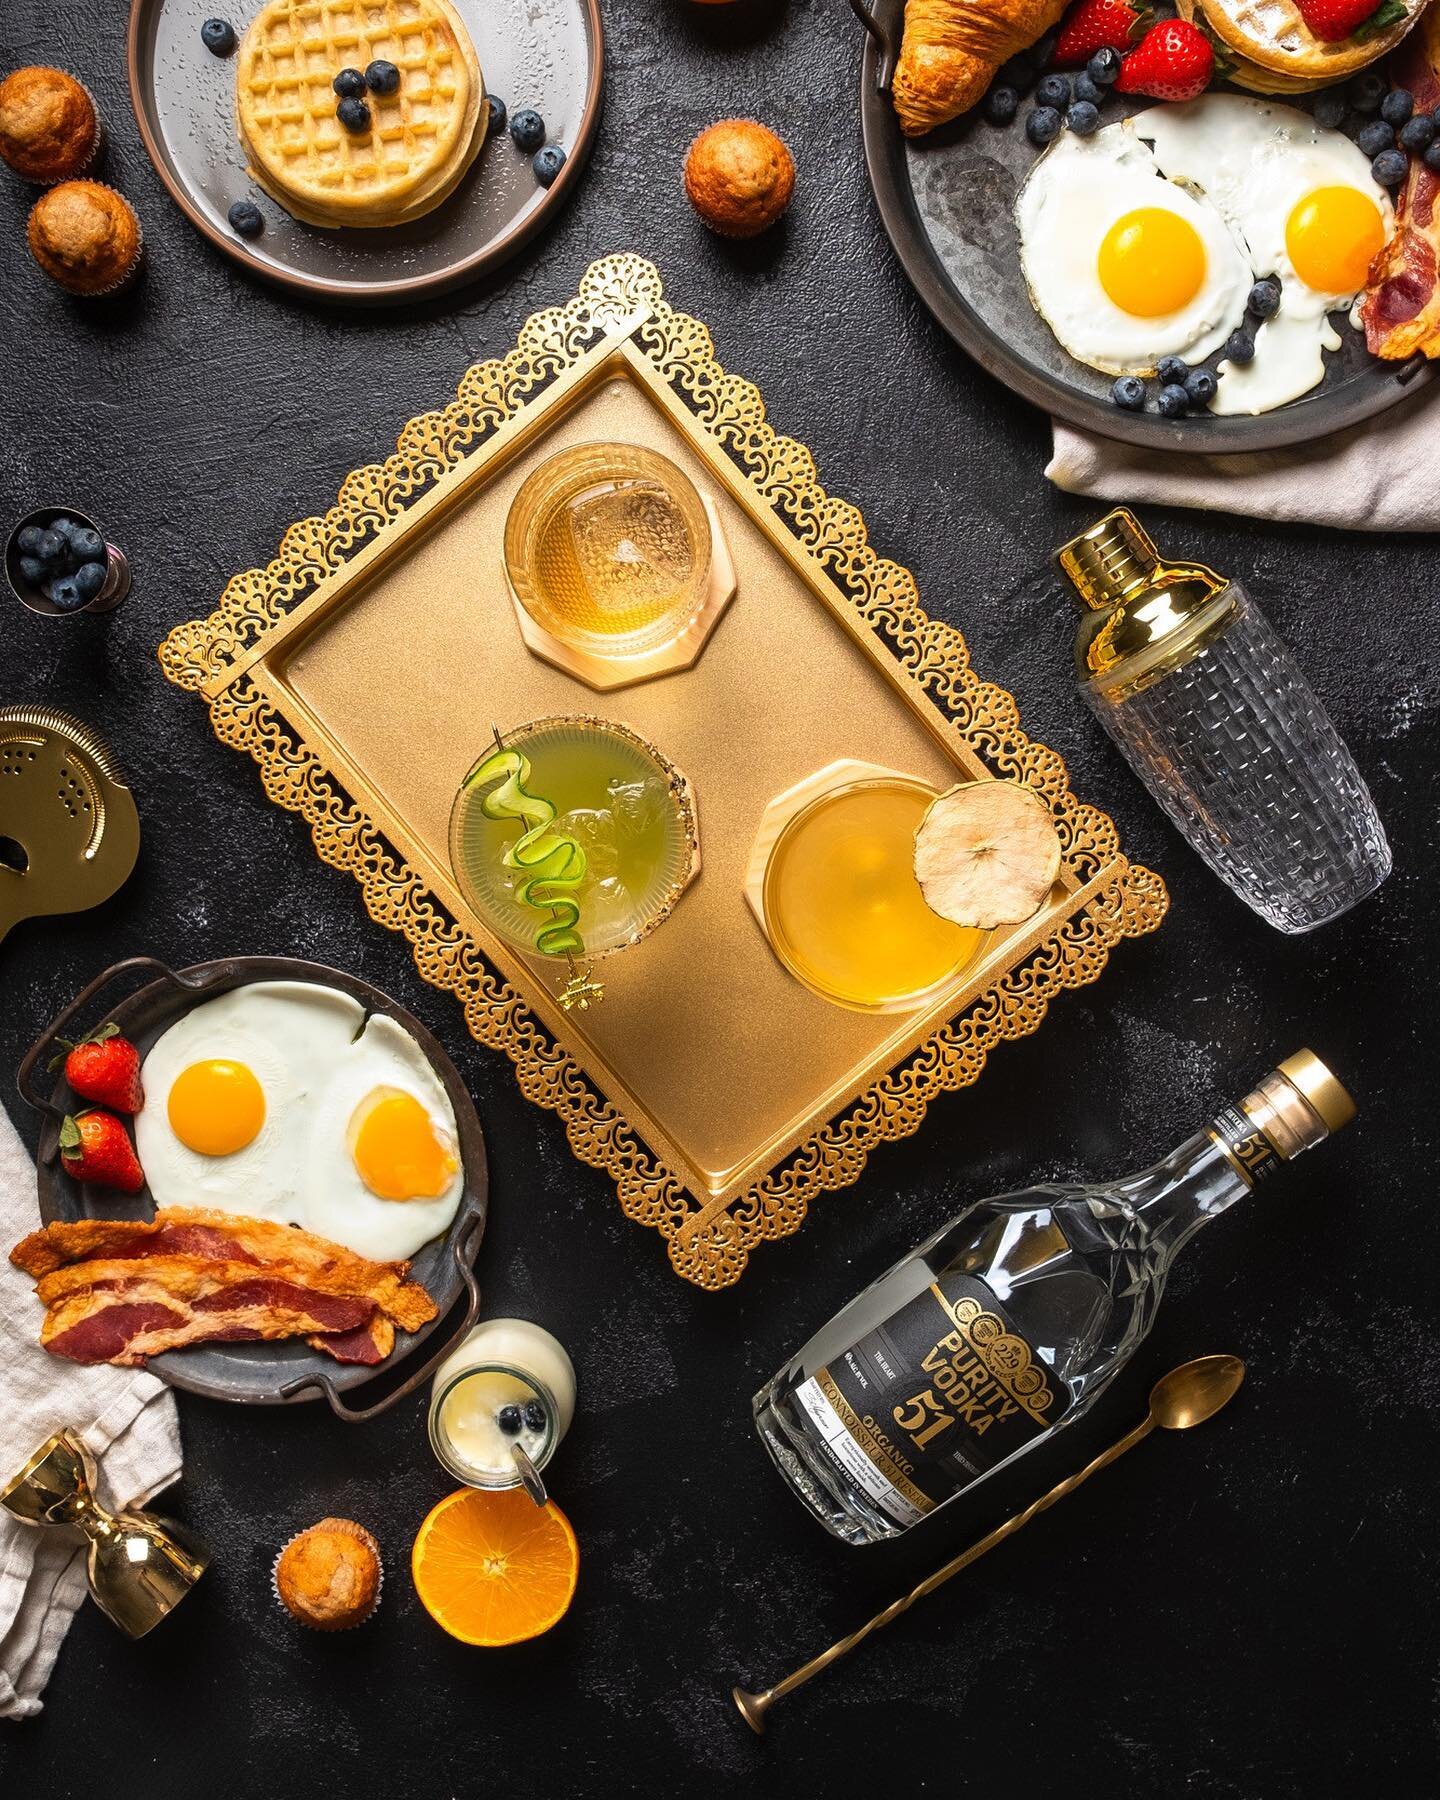 It&rsquo;s brunch time! Speaking of brunch&hellip; 

We&rsquo;re excited to be featured in the @shakerandspoon &ldquo;Vodka Brunch Box 2&rdquo;, thank you to
@steakbonestacey for recommending the Purity 51 Vodka for her outstanding &lsquo;Green Demon